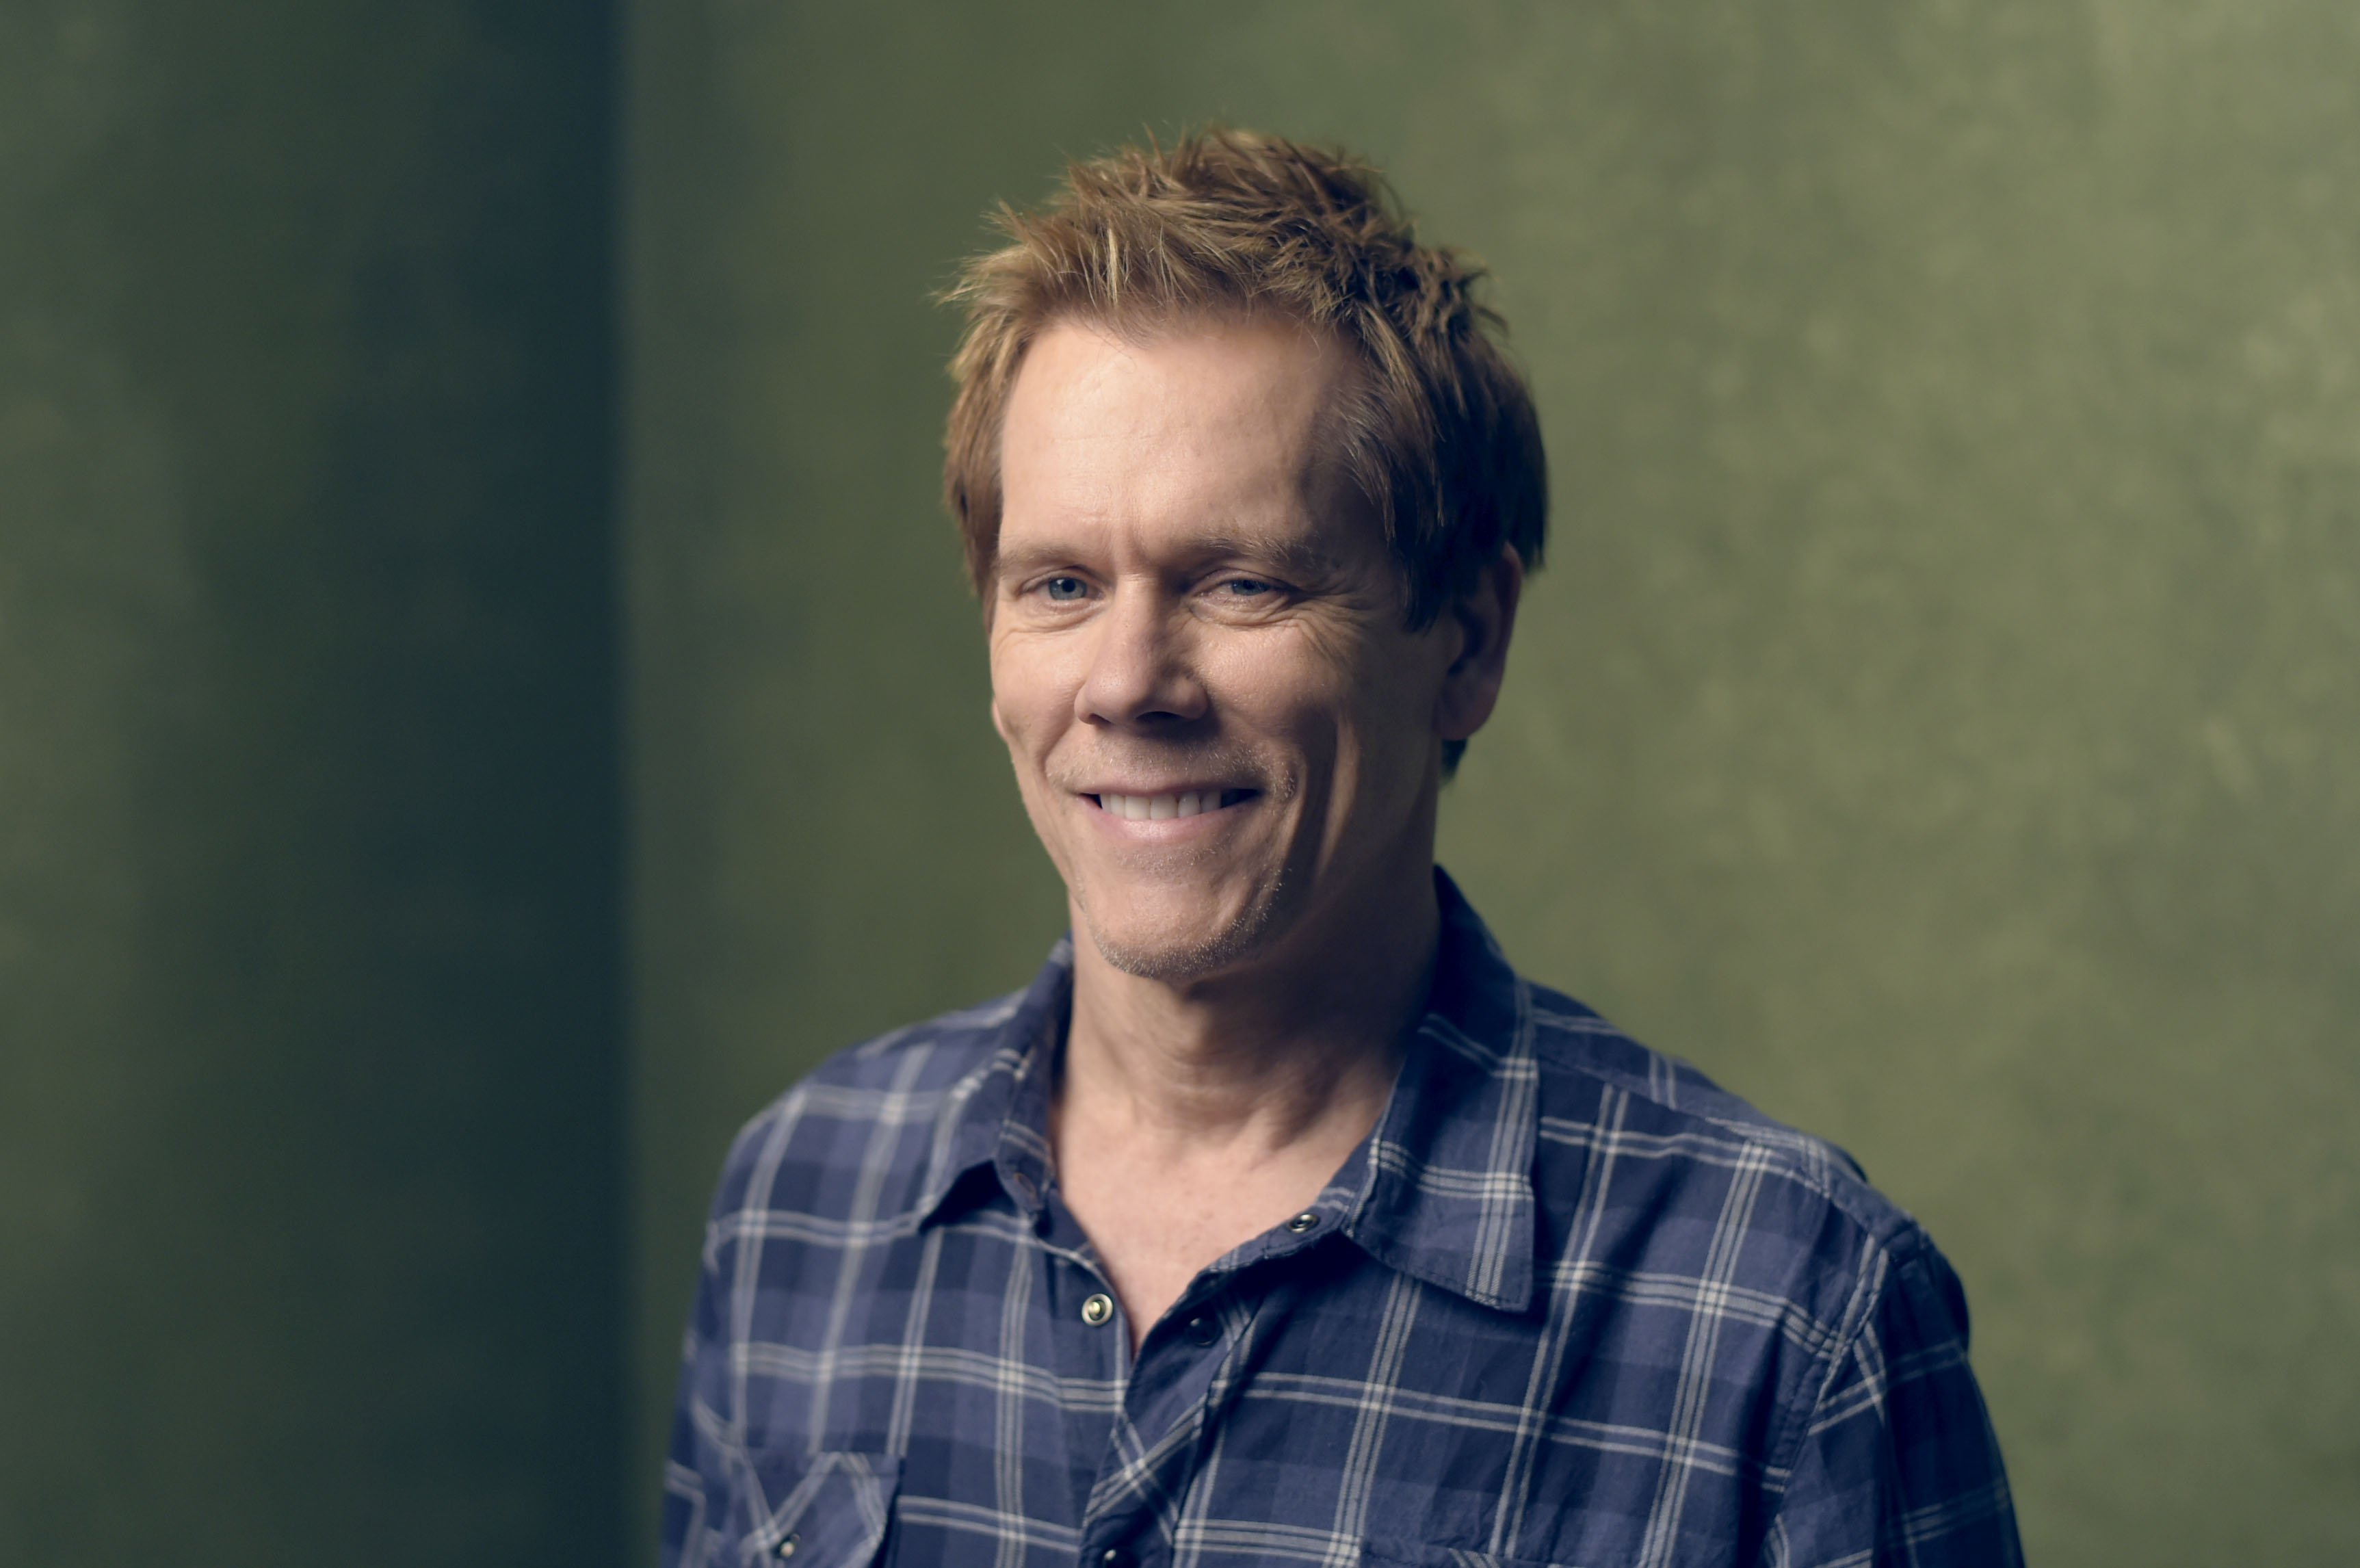 Kevin Bacon from "Cop Car" poses for a portrait at the Village at the Lift Presented by McDonald's McCafe during the 2015 Sundance Film Festival on January 24, 2015 in Park City, Utah | Photo: GettyImages